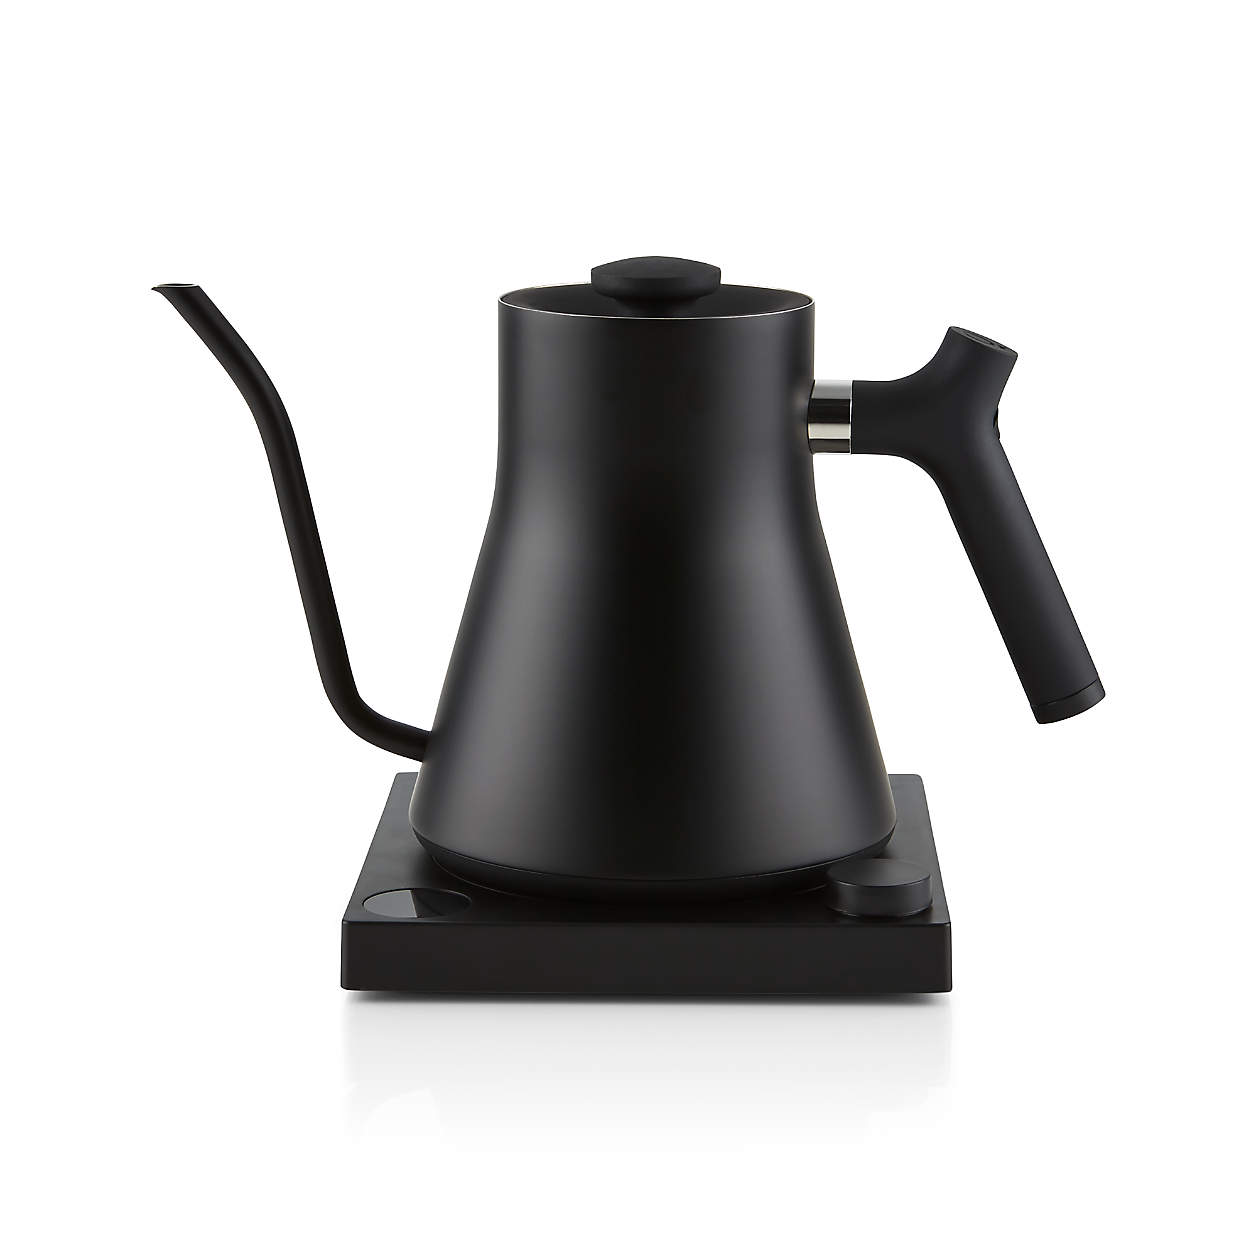 Shop Fellow Stagg EKG Matte Black Electric Pour-Over Kettle from Crate and Barrel on Openhaus